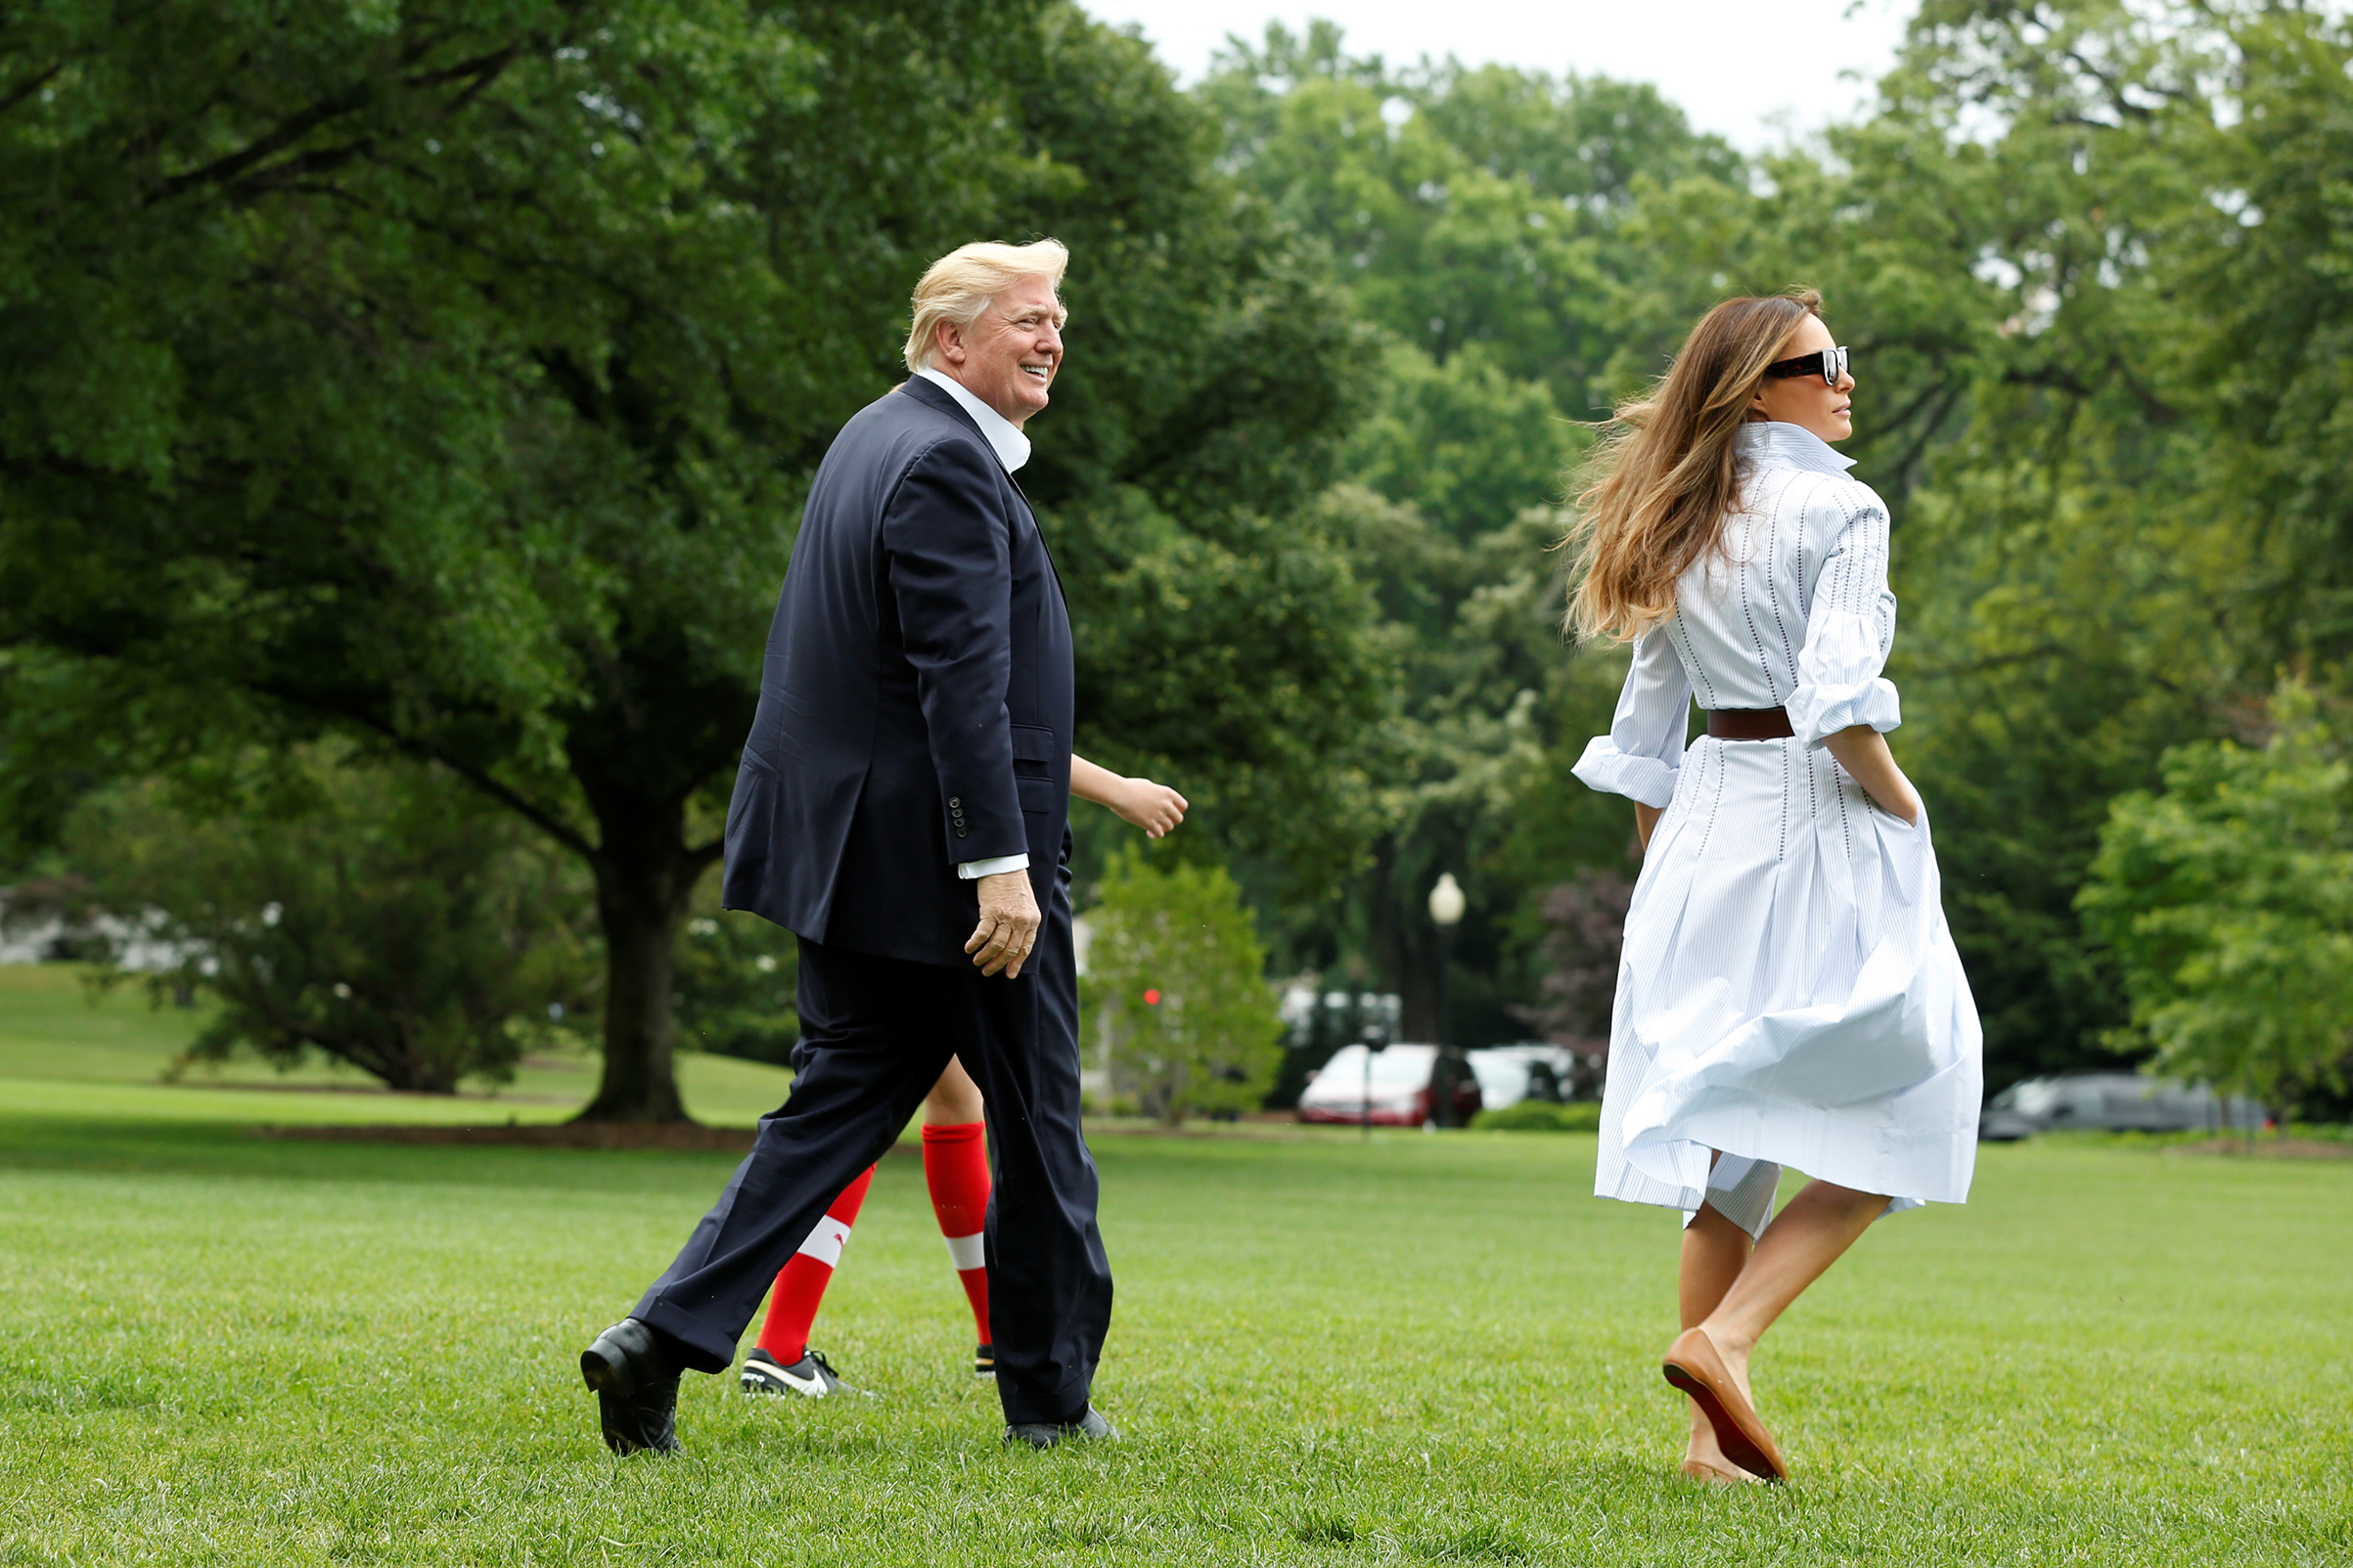 President Donald Trump with first lady Melania wearing a shirt dress by Gabriela Hearst, and their son Barron walk on the South Lawn of the White House in Washington, U.S., before their departure to Camp David, June 17, 2017.